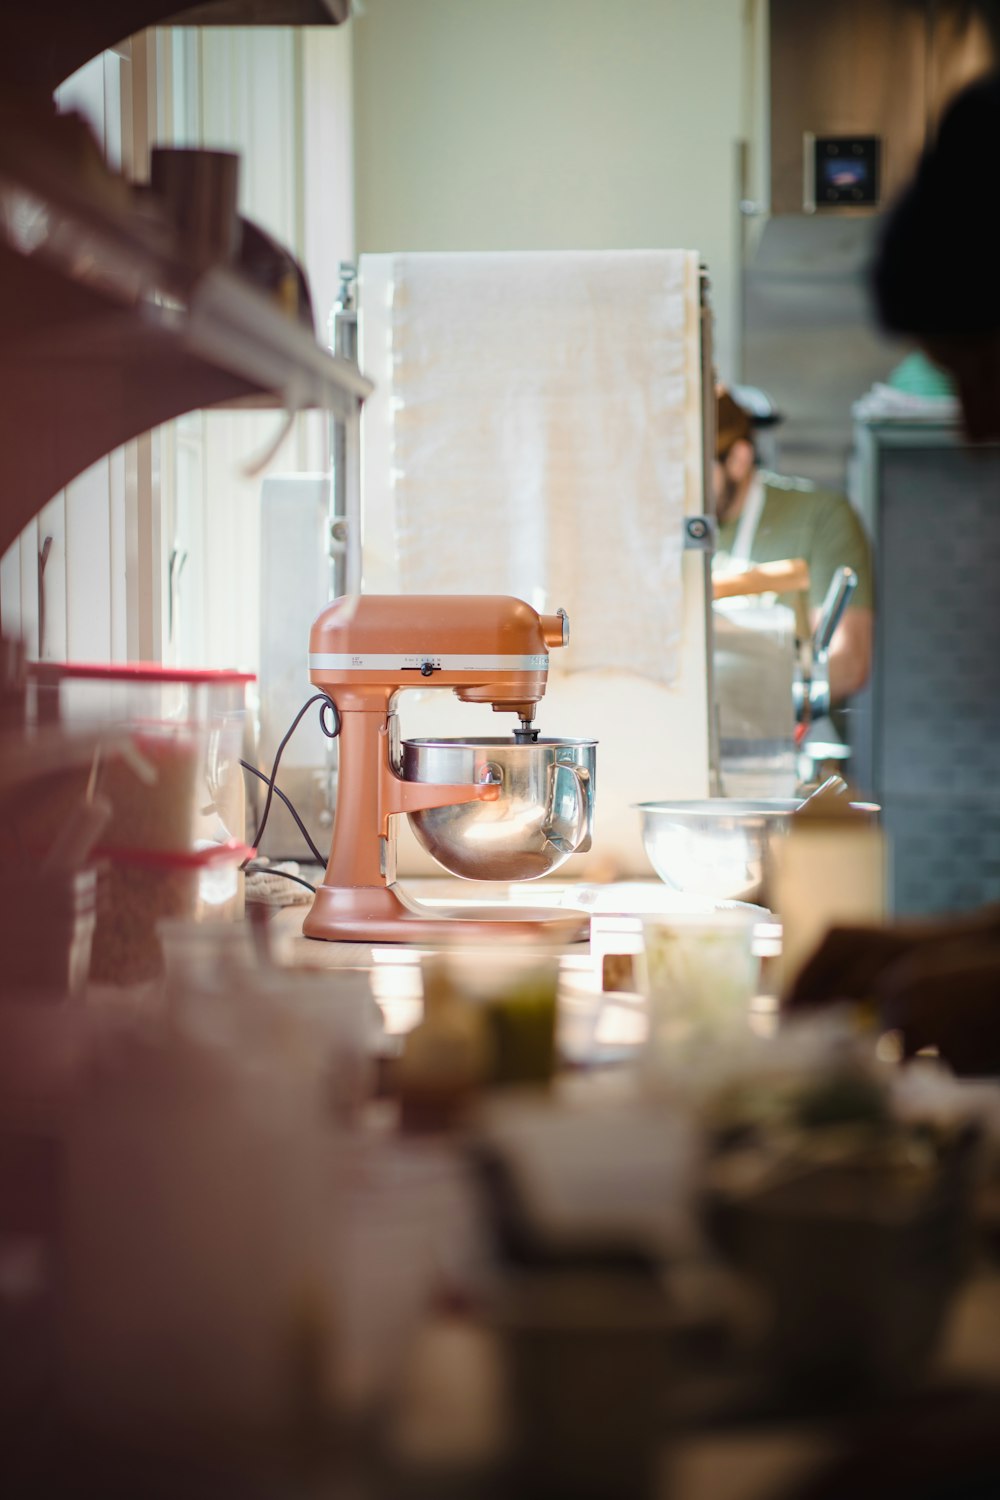 a kitchen scene with focus on the mixer